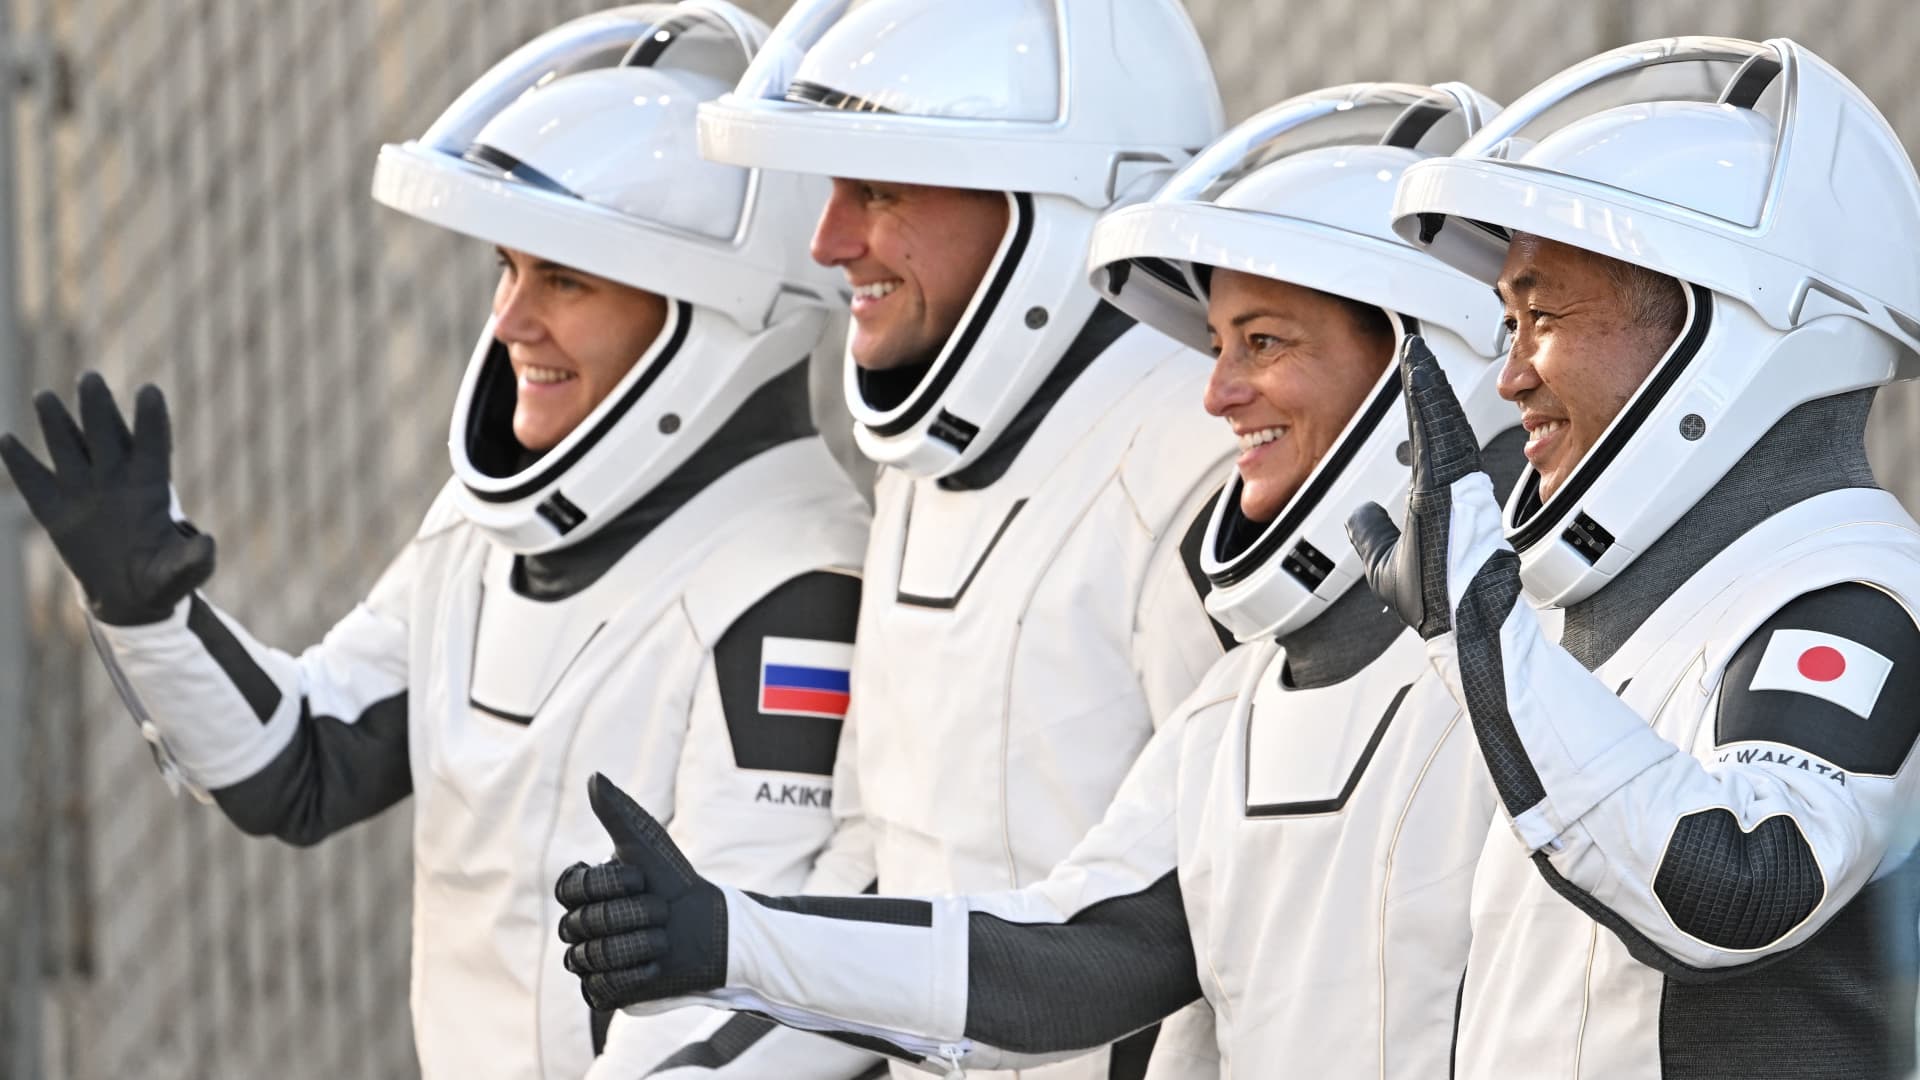 Left to right: Russian cosmonaut Anna Kikina, NASA astronaut Josh Cassada, NASA astronaut Nicole Mann, and Japanese astronaut Koichi Wakata arrive ahead of the launch of the SpaceX Crew-5 mission from the Kennedy Space Center in Florida on October 5, 2022.